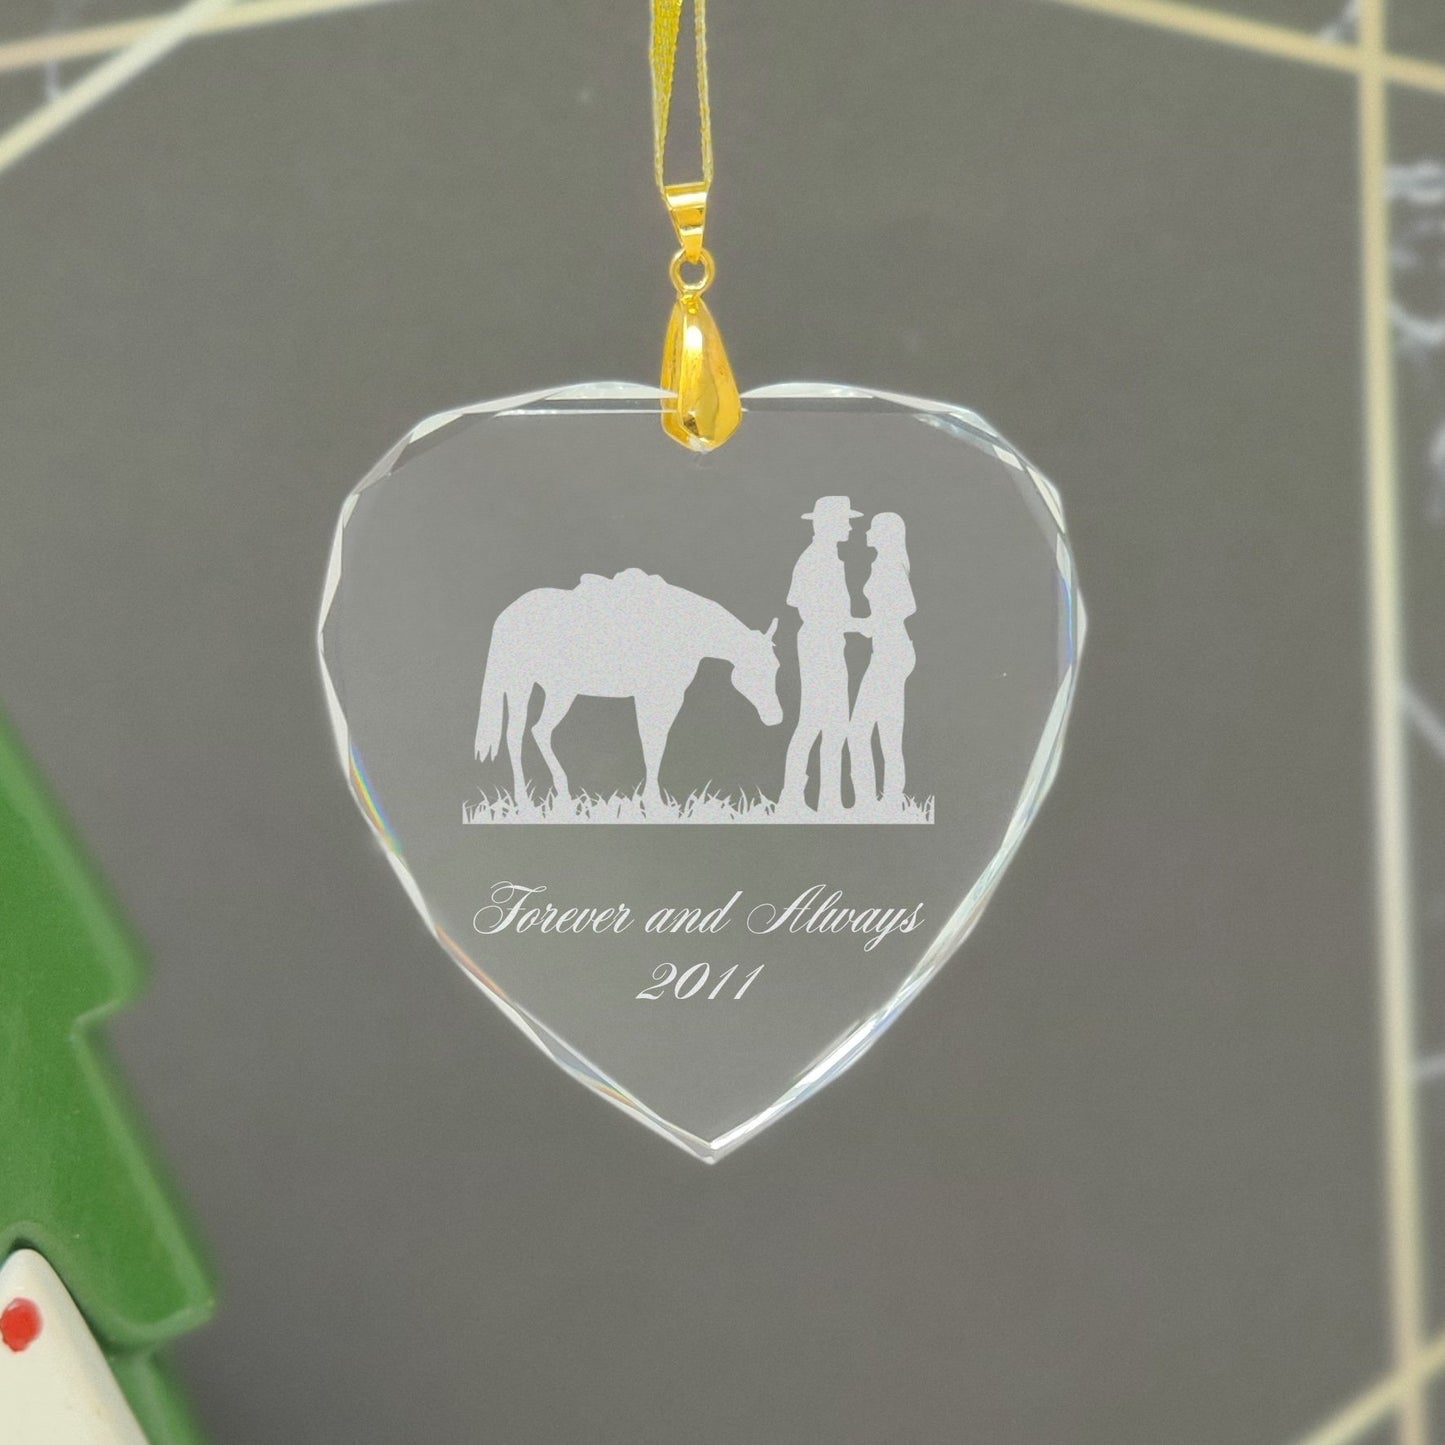 LaserGram Christmas Ornament, Dolphin, Personalized Engraving Included (Heart Shape)